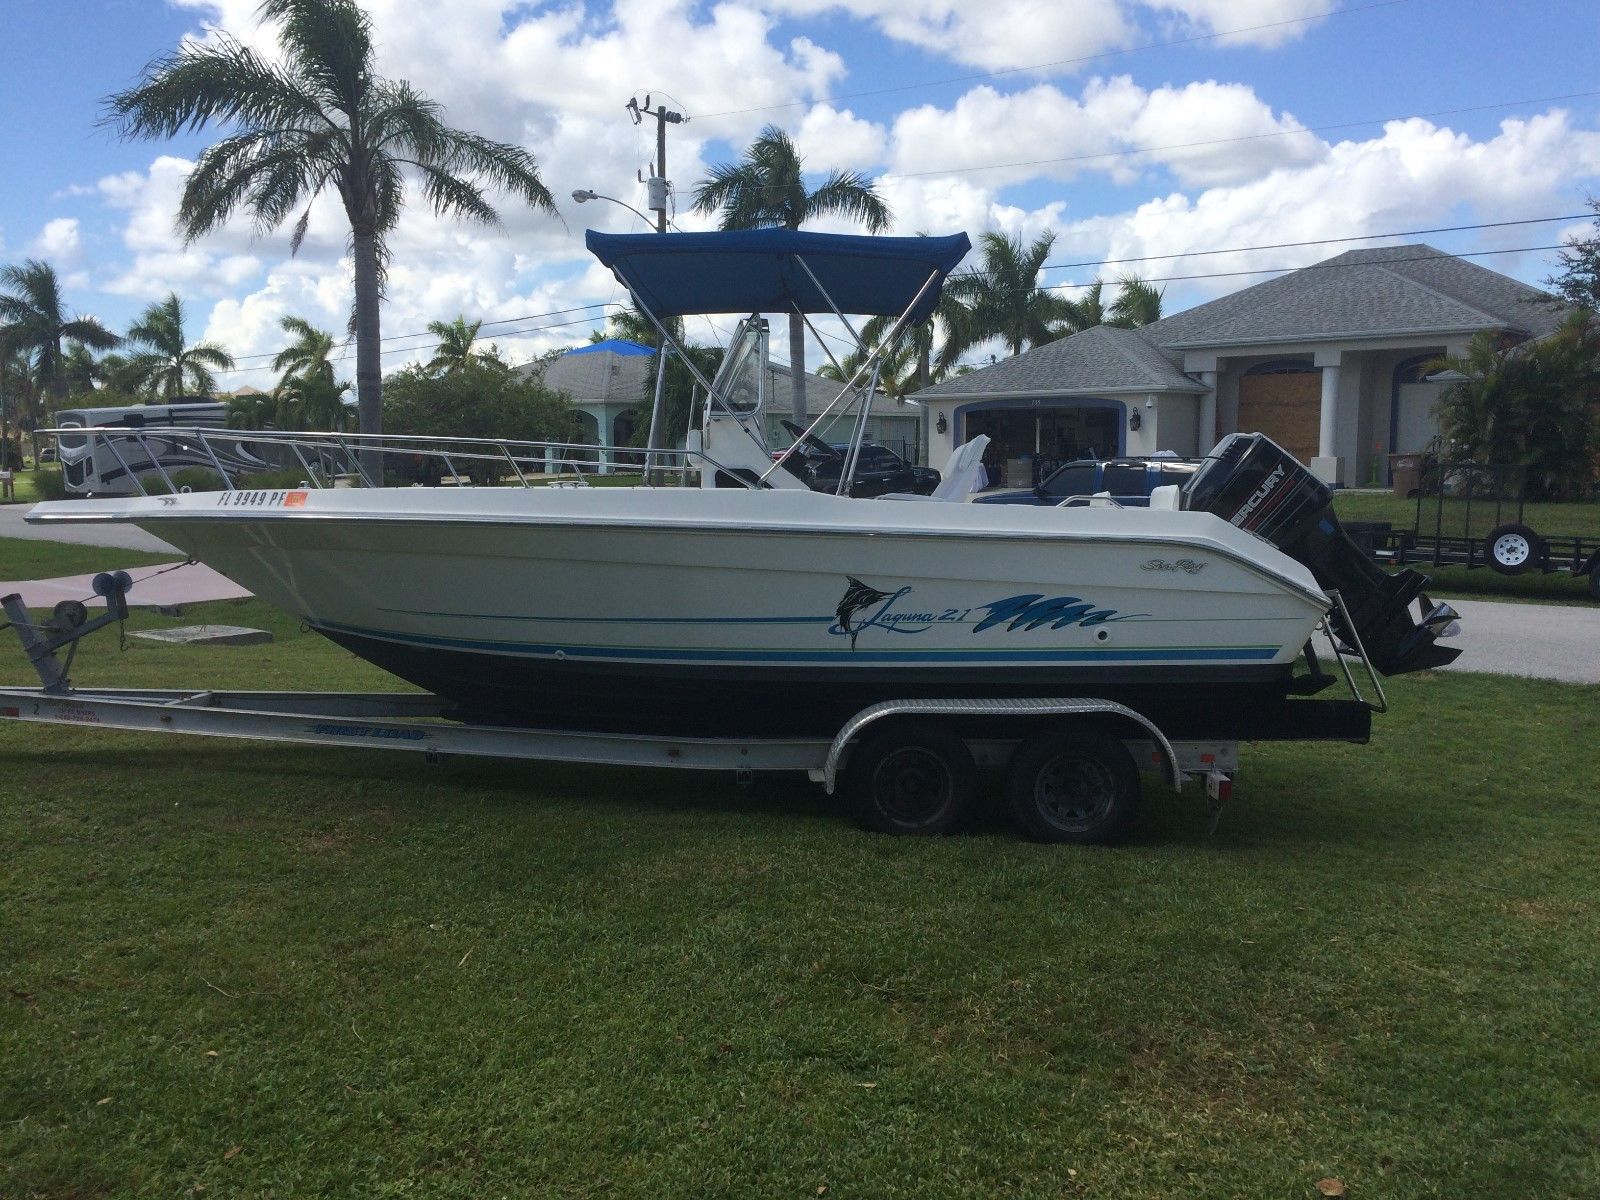 Sea Ray Laguna 21 1996 For Sale For 9 500 Boats From Usa Com.